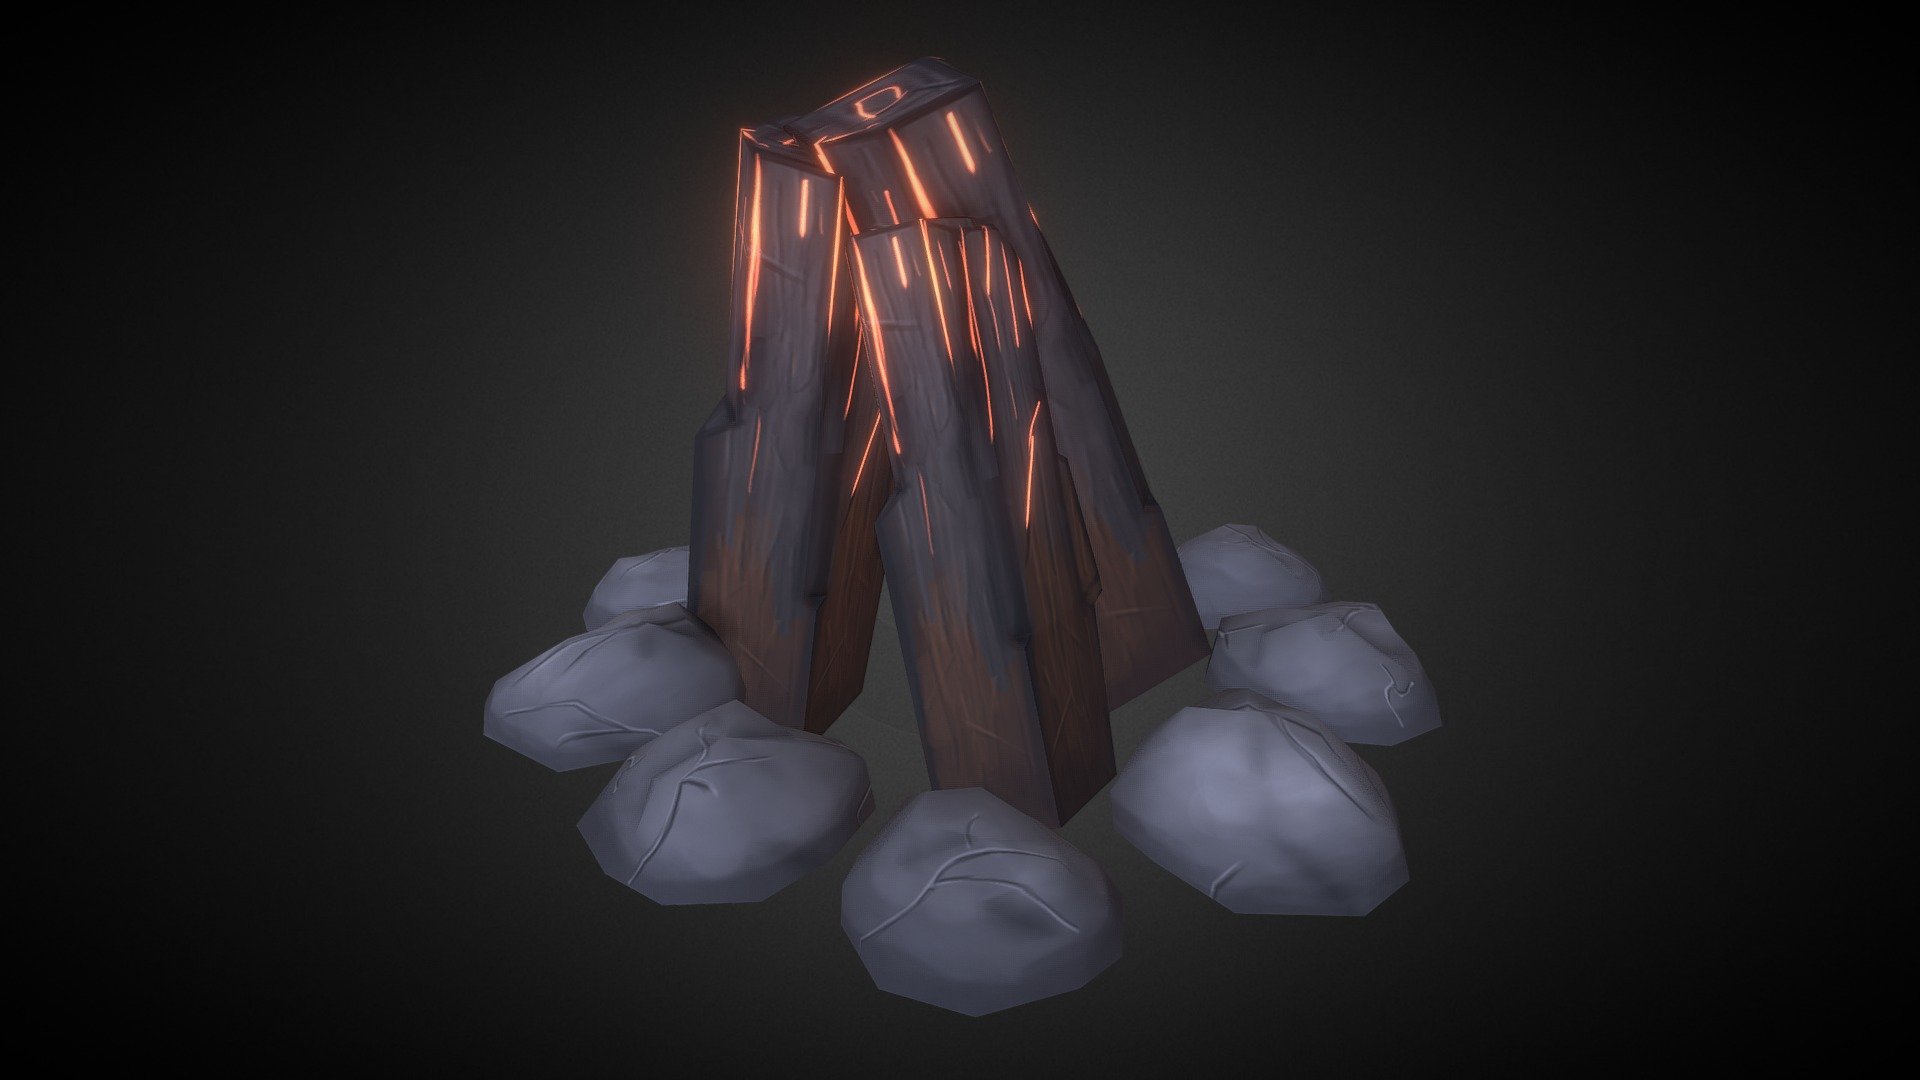 This is a low poly stylized camp fire part of a bigger scene I'm working i uploaded this prop to test some smoke animation but it failed, if anyone has any idea how to I could add my smoke particles into my scene here please let me know!!
thank you 3d model